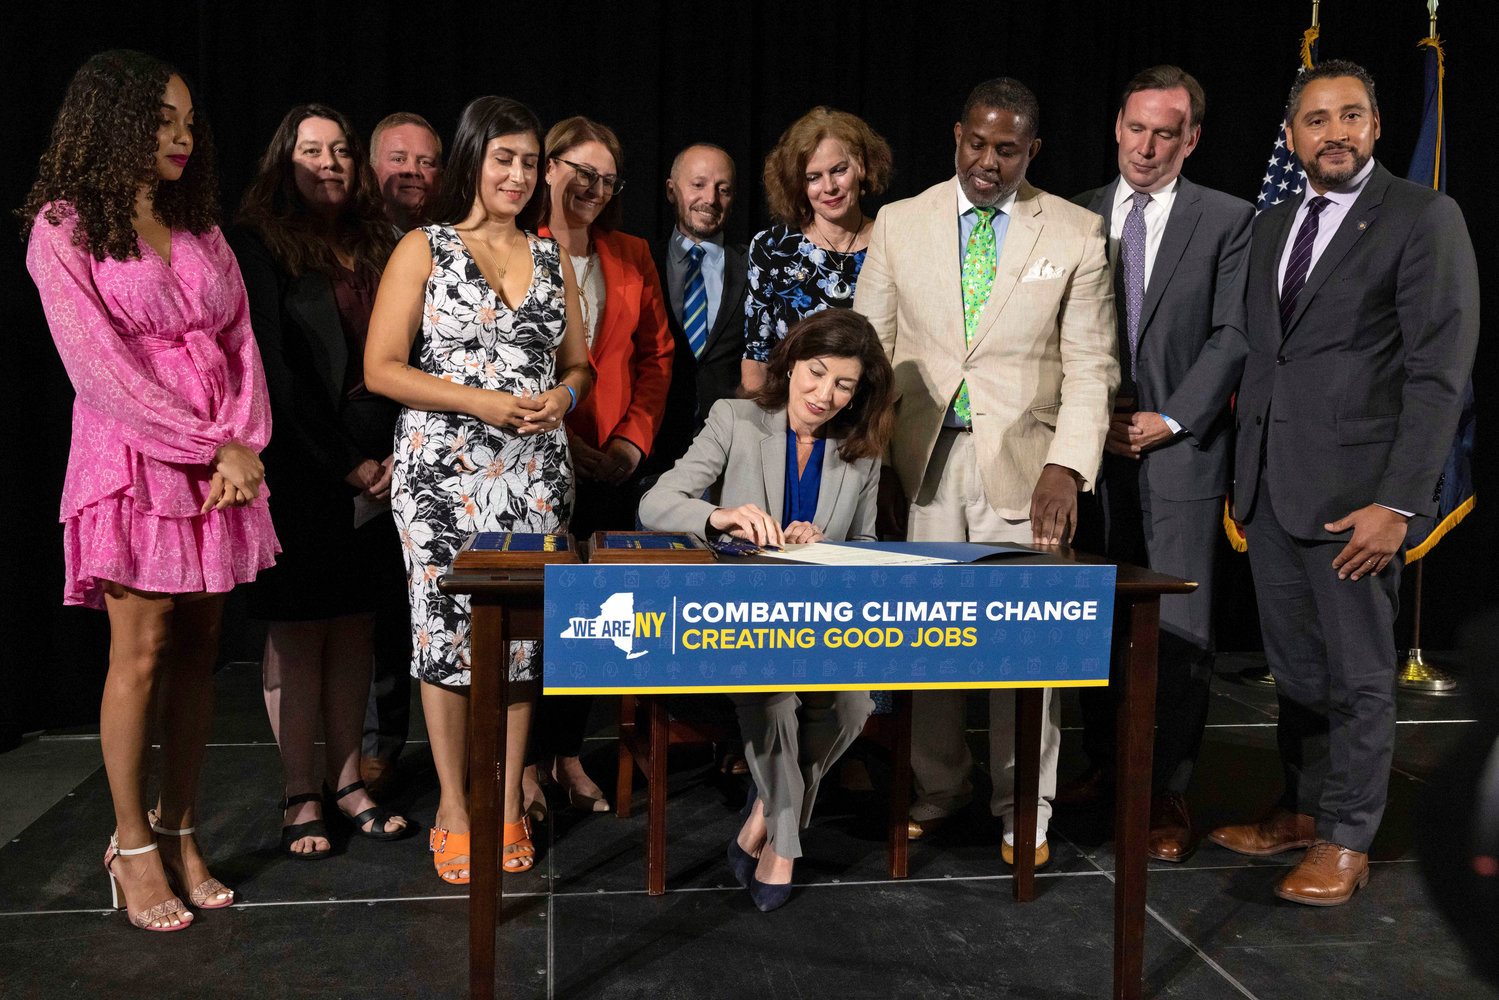 New York Gov. Kathy Hochul signs a legislative package to reduce greenhouse gas emissions and create green jobs during a press conference, Tuesday, July 5, 2022, at the Brooklyn Navy Yard in the Brooklyn borough of New York. (AP Photo/Yuki Iwamura)